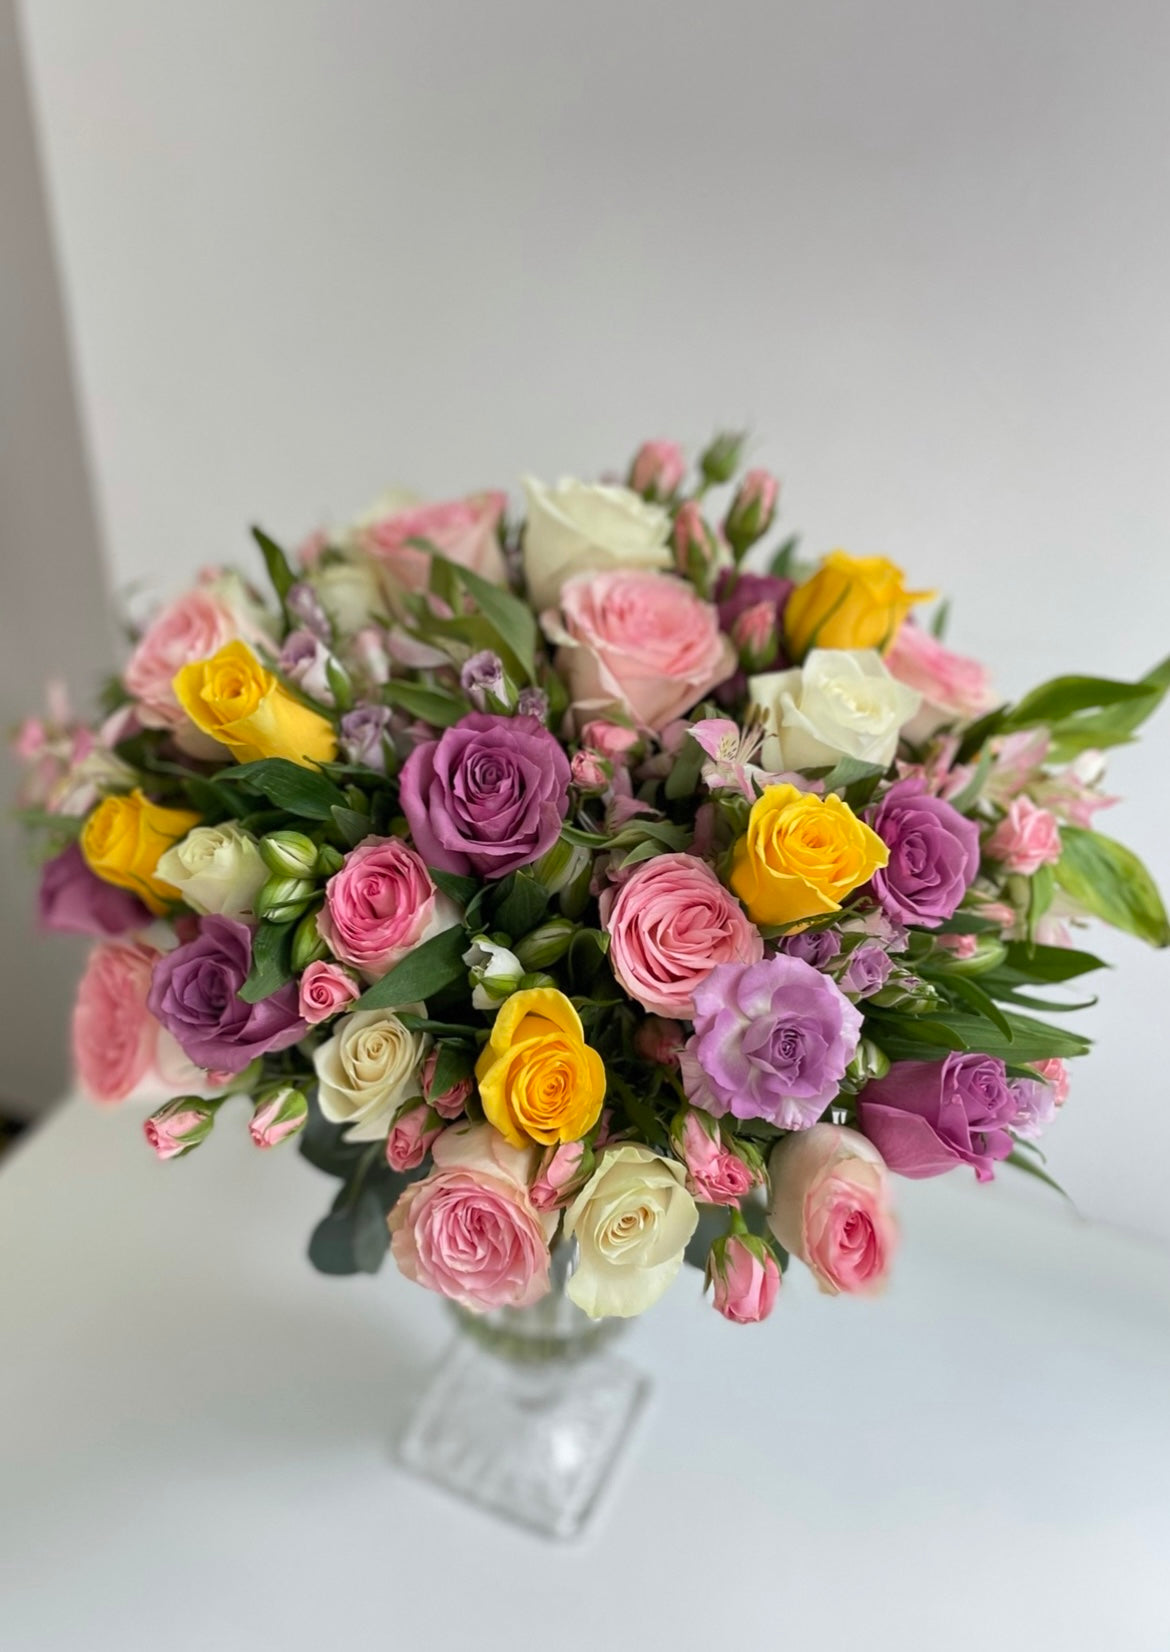 Colourful roses in a vase